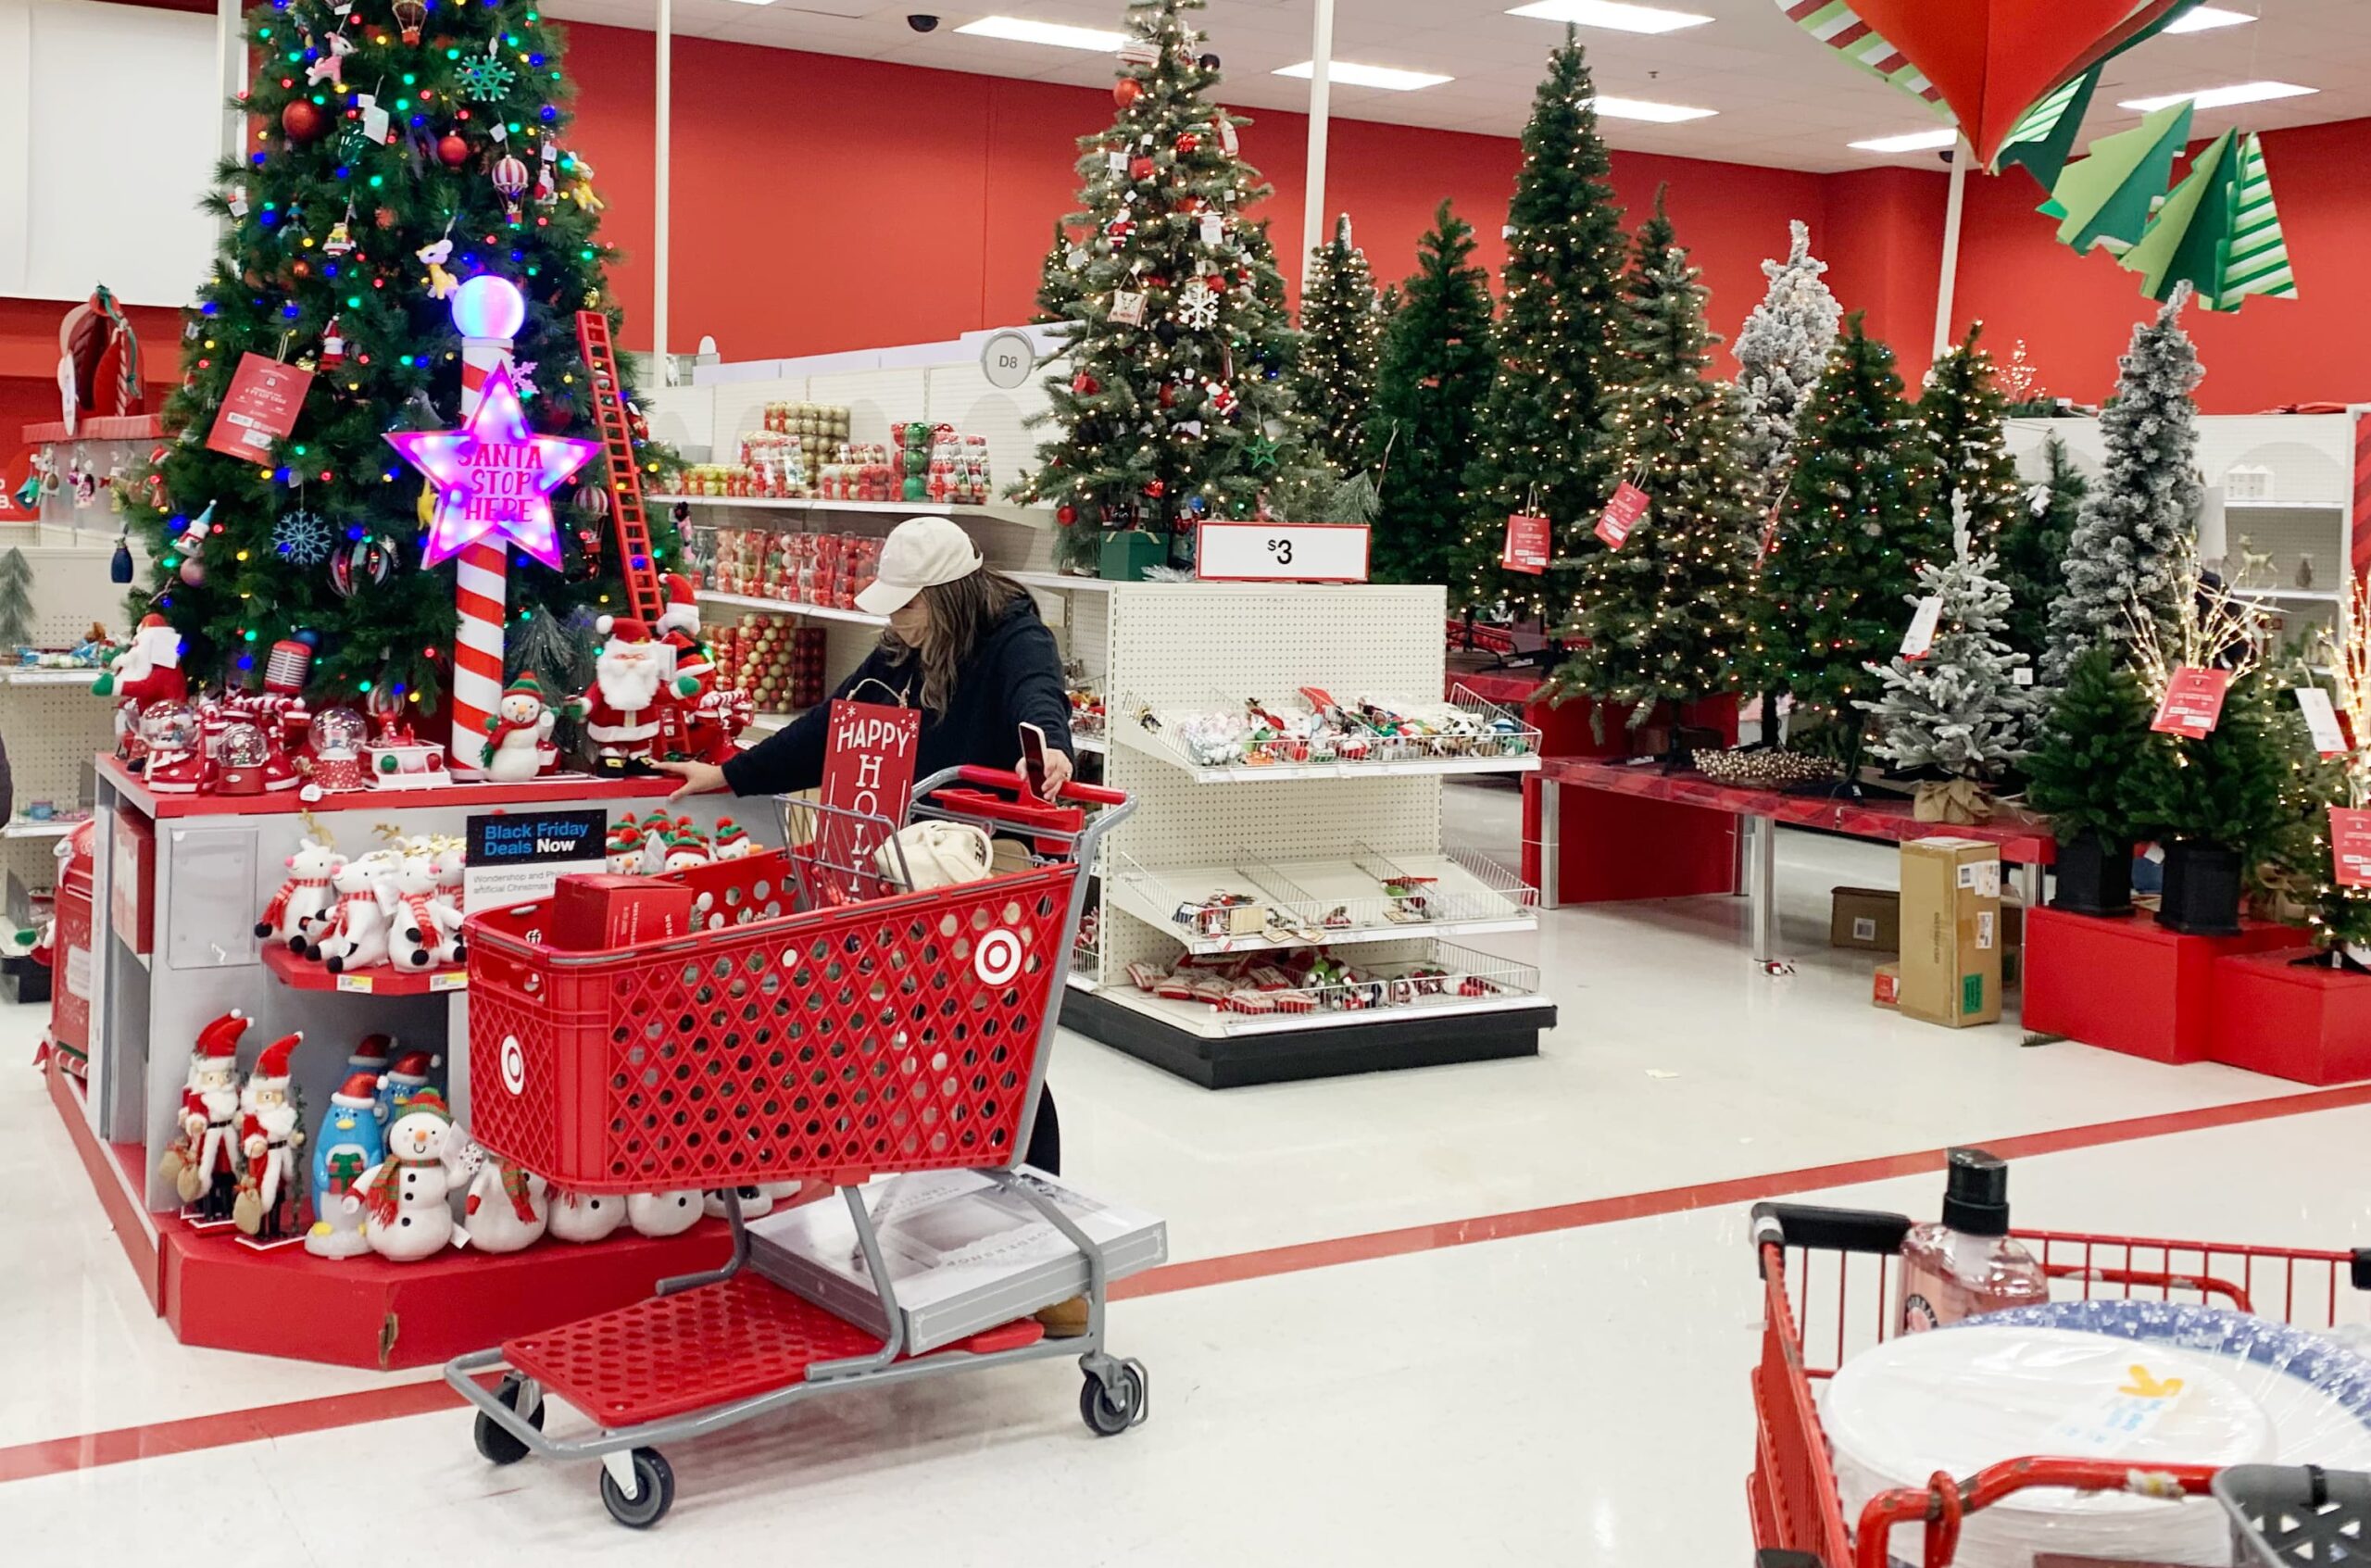 Target to offer workers up to 5 million more hours this year